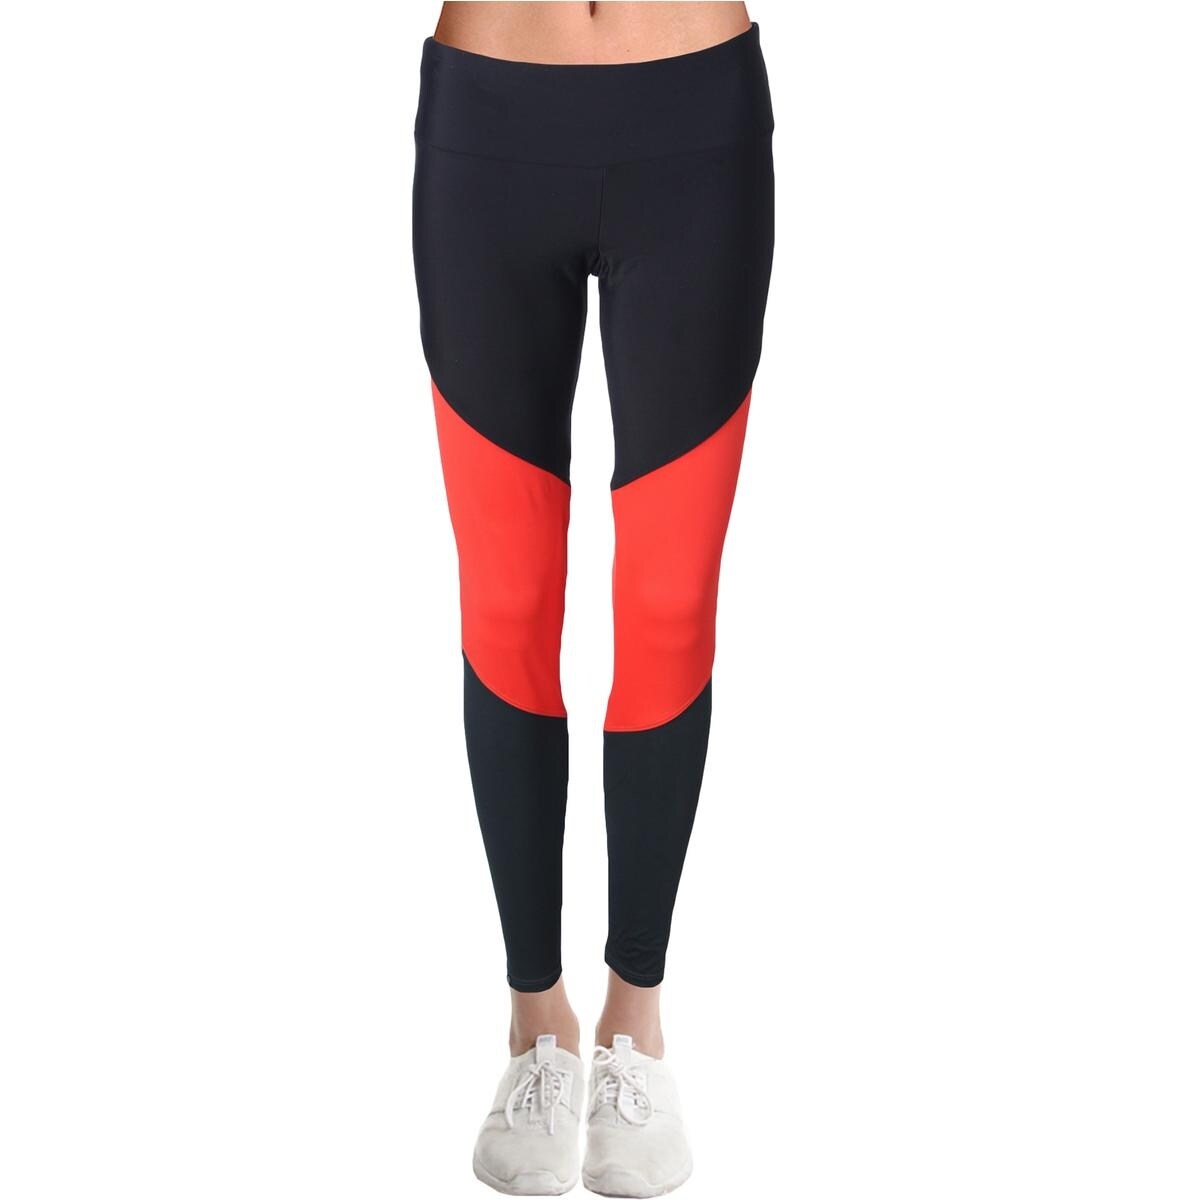 Athletic Wear for Women, Men, and Teens